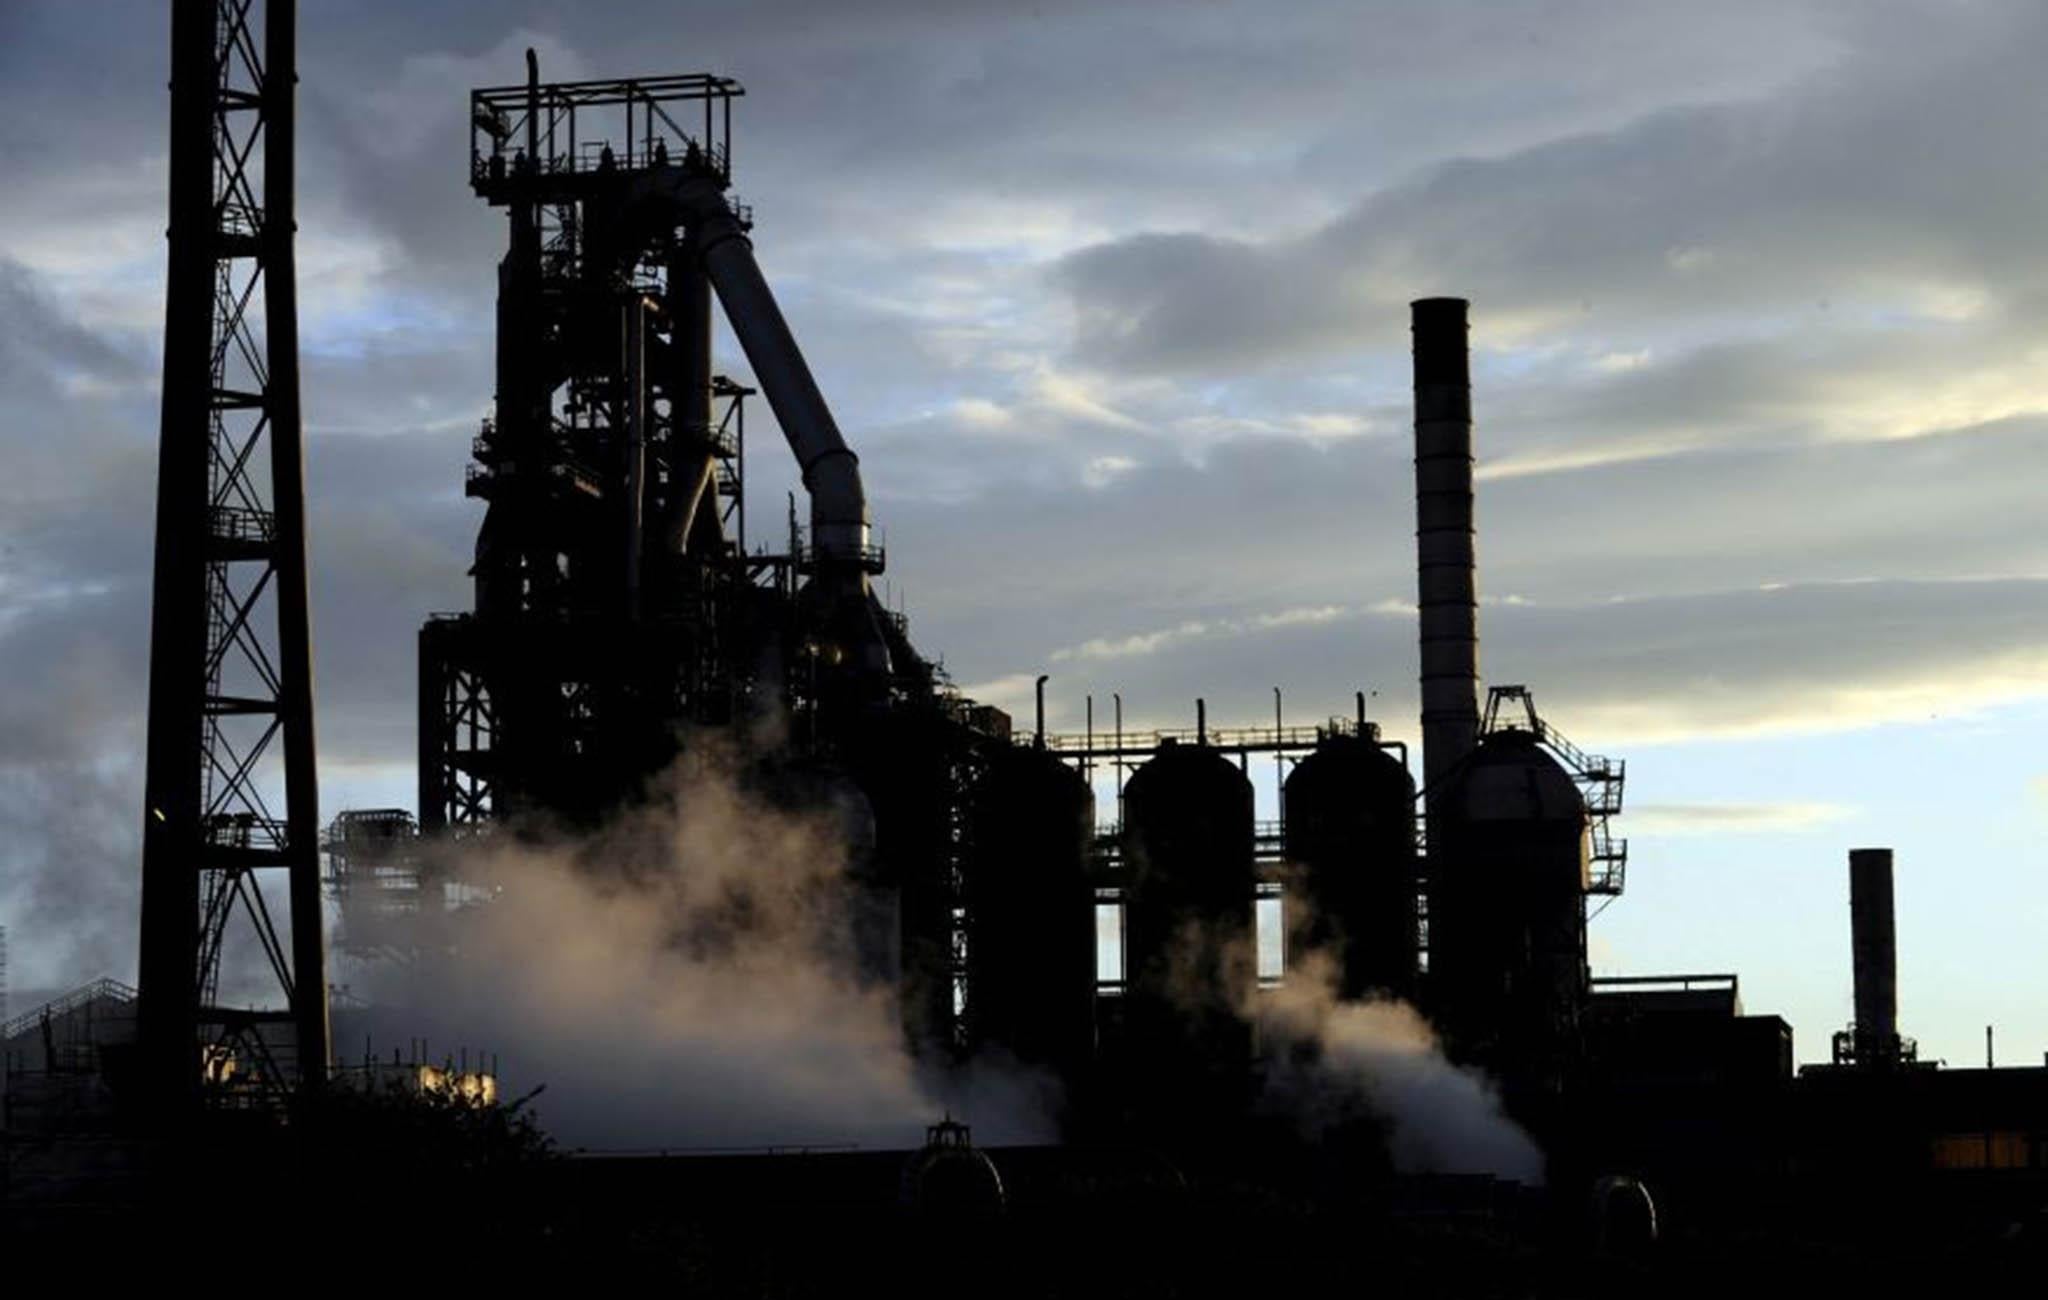 Brexiteers seem happy to wipe out steel plants such as Port Talbot by demanding the unilateral scrapping of all import tariffs